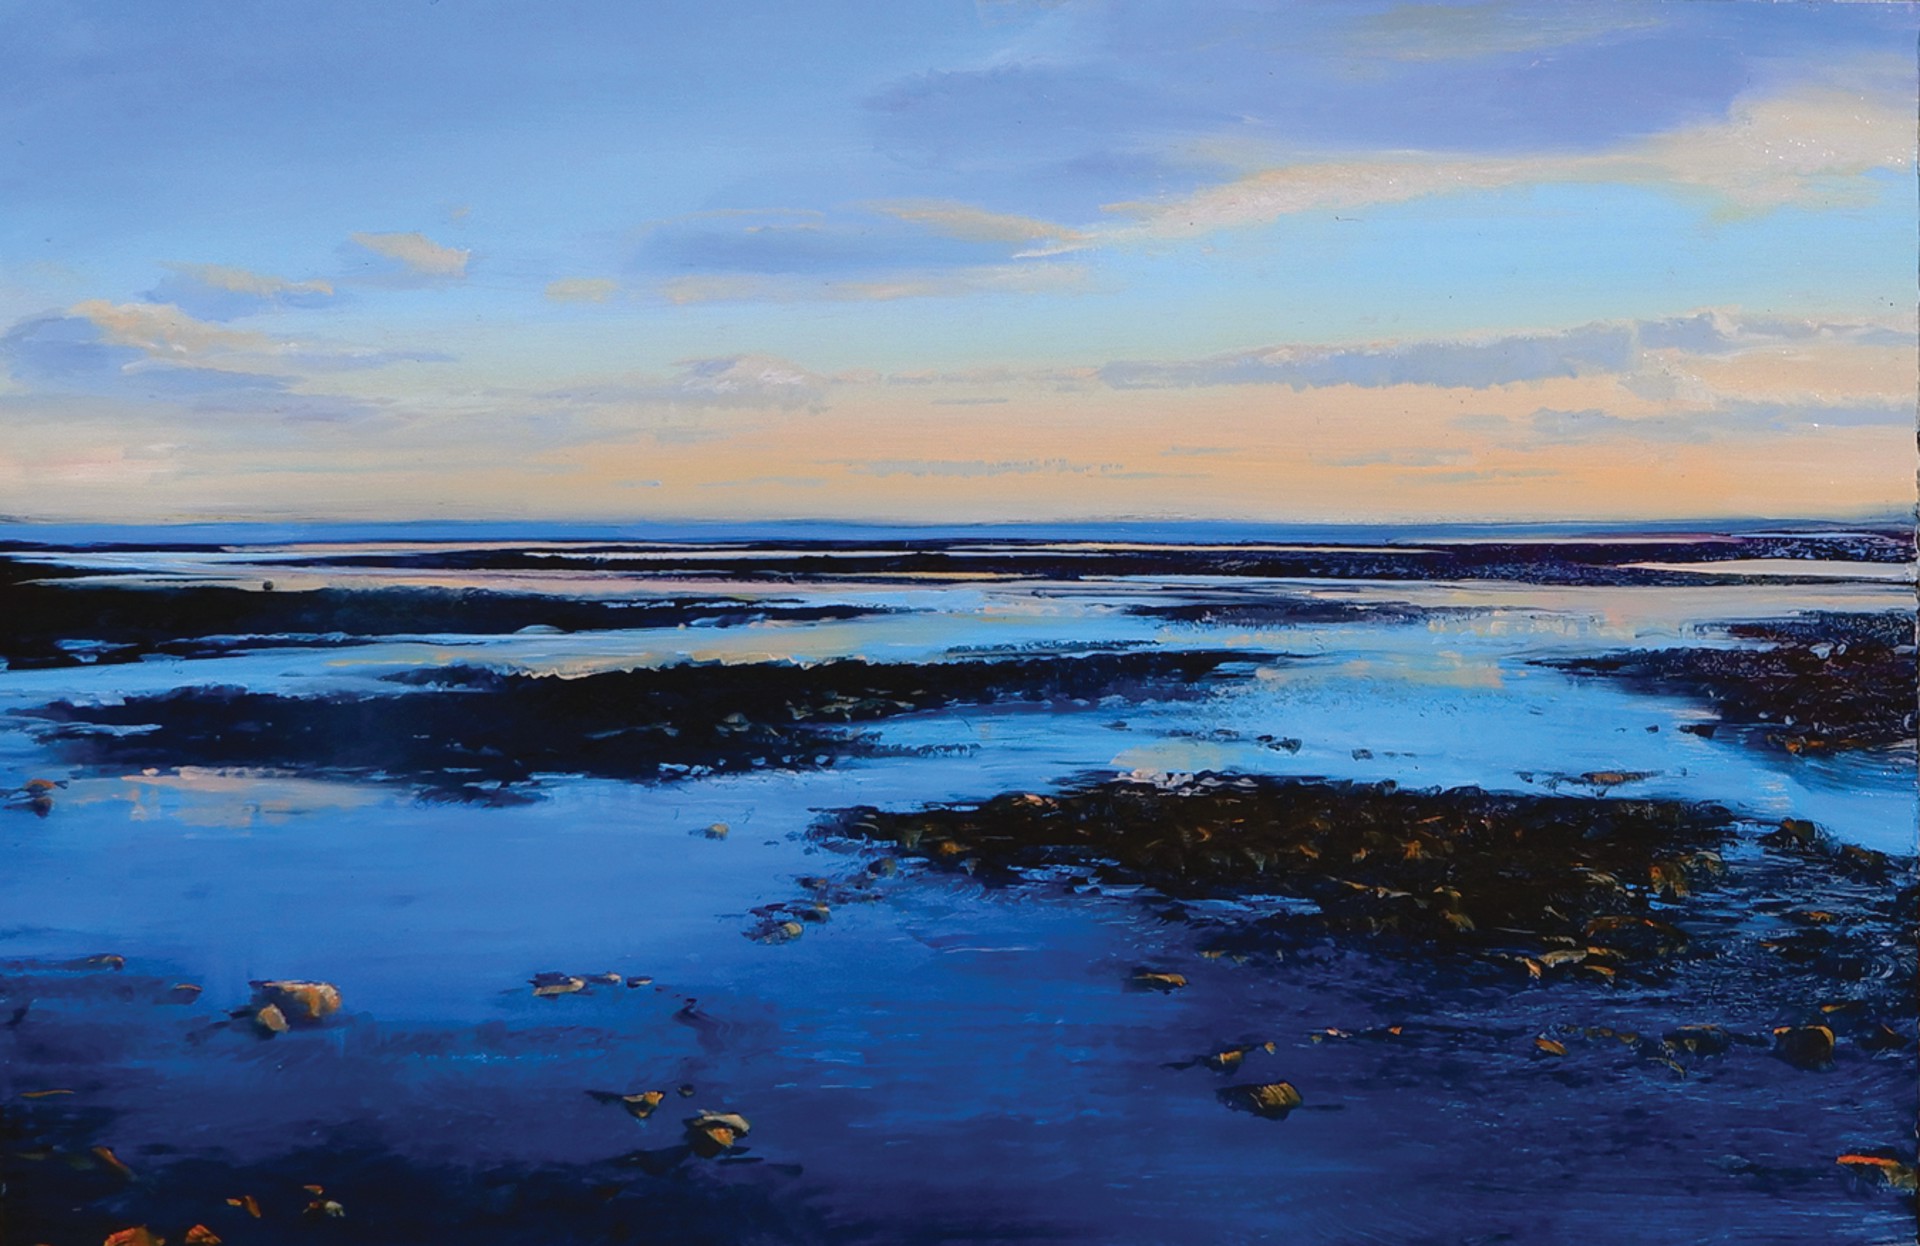 Sky, Sea and Shore by David Dunlop